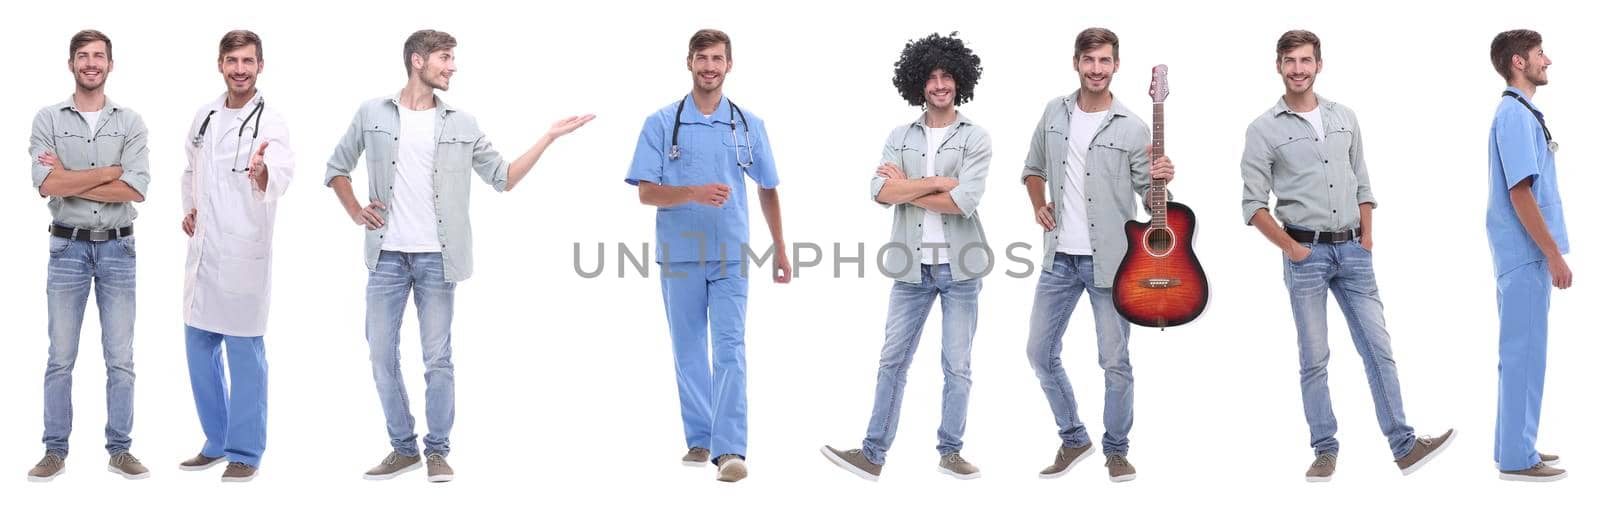 collage doctor and young man isolated on white by asdf